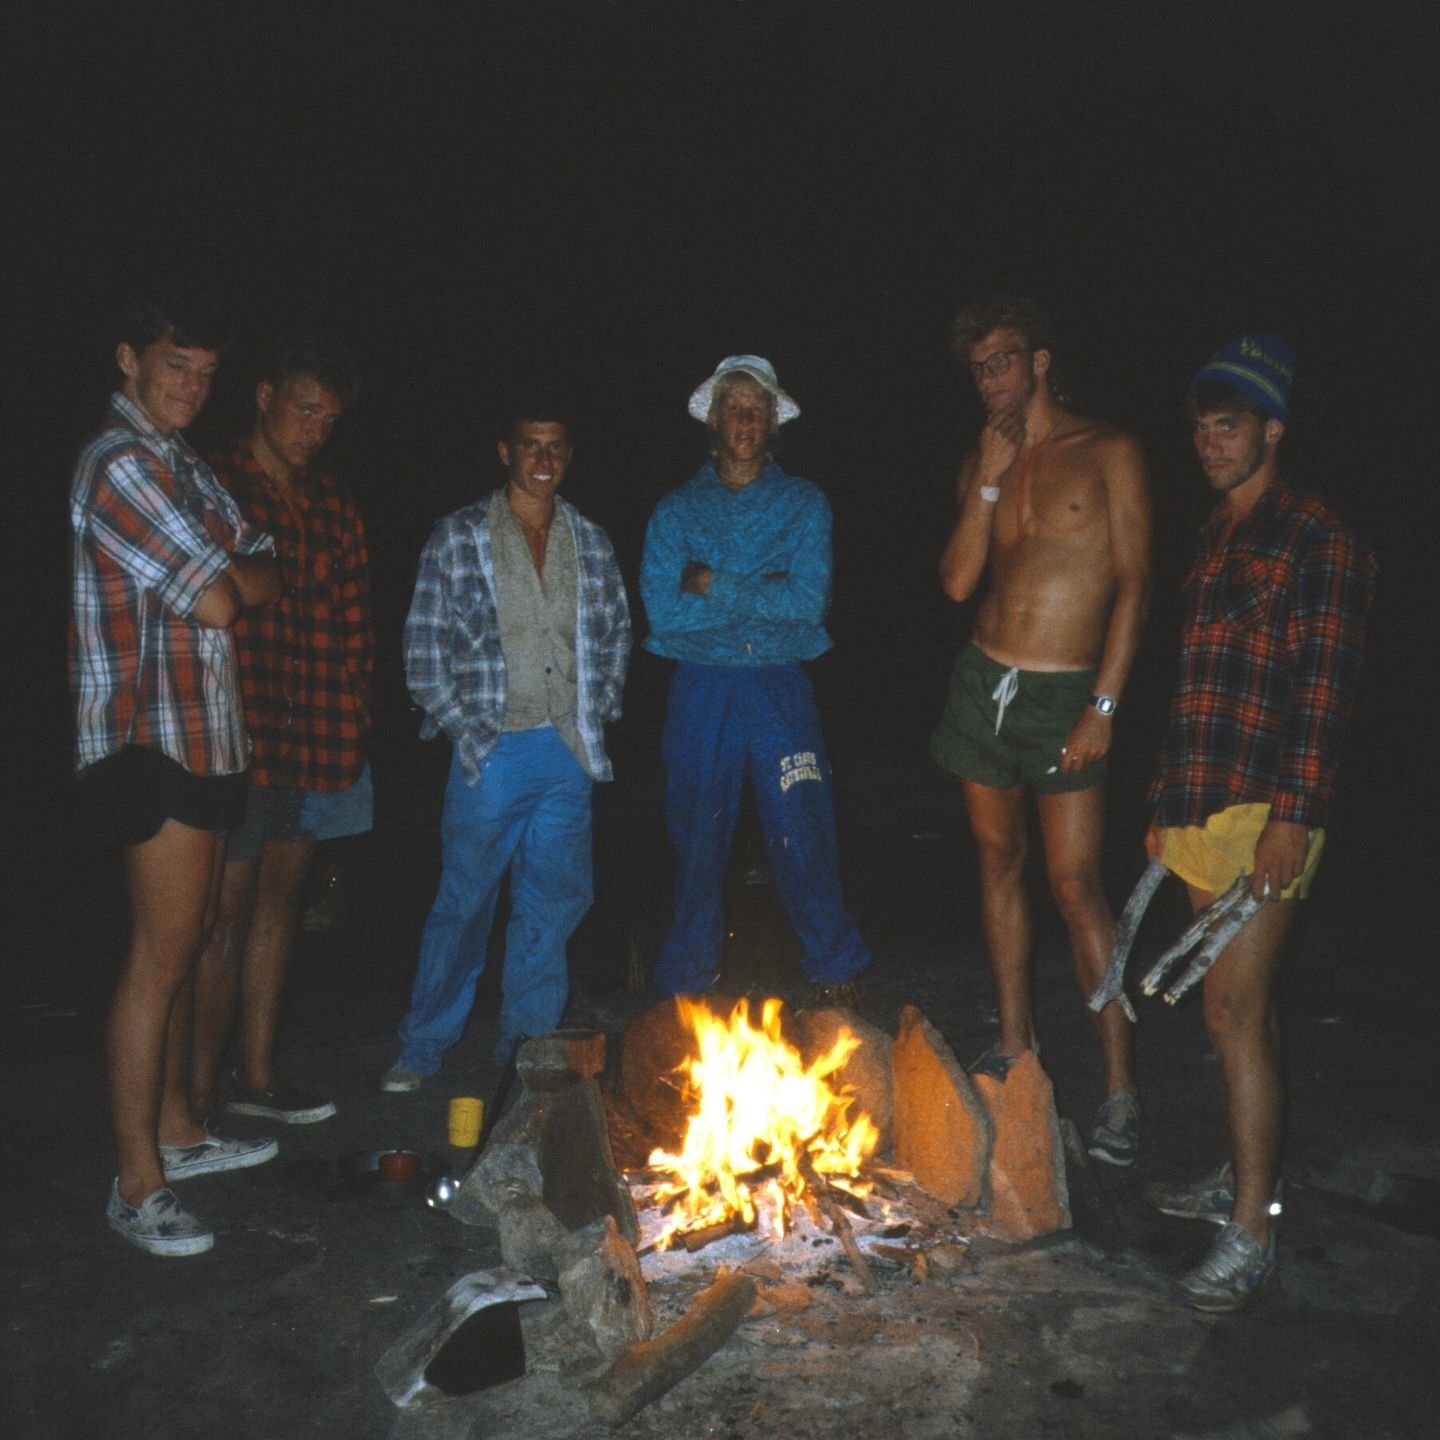 🔥🔥🔥🔥🔥🔥🔥
Warm fire, good company, great outdoors

📸 1: 1988
📸 2: 1993
📸 3: 1984

#lvithrowbackthursday